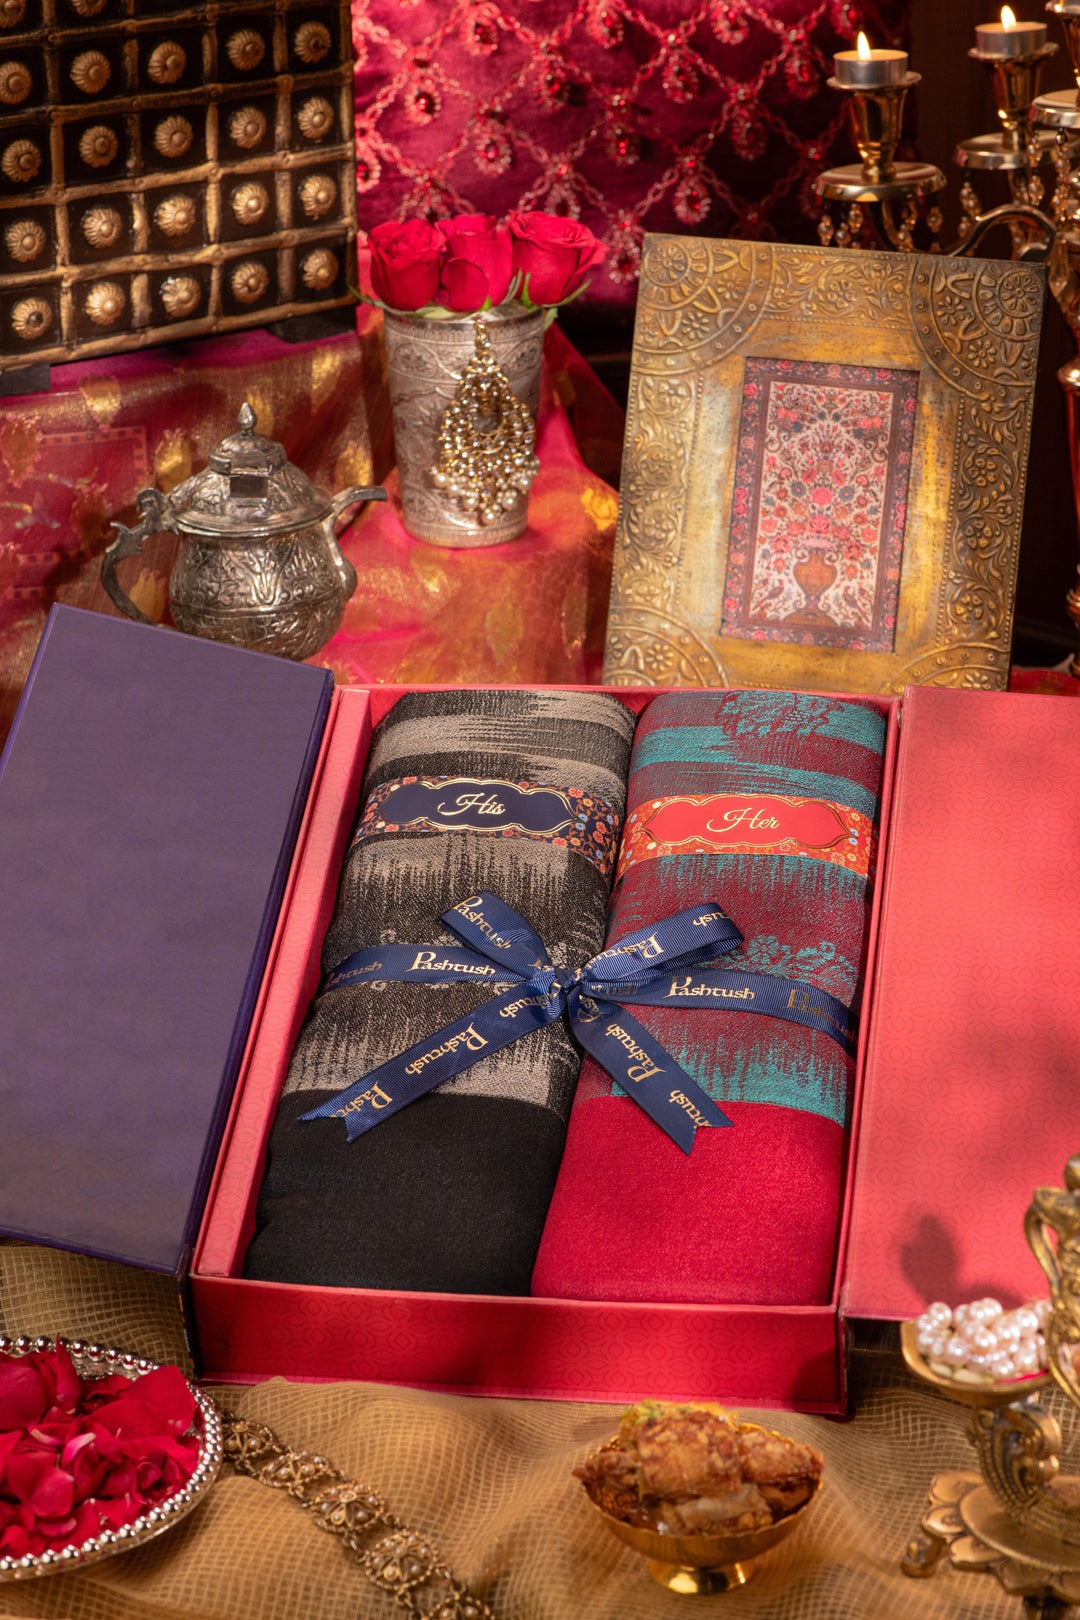 Pashtush India Gift Pack Pashtush His And Her Gift Set Of Ikkat Design Fine Wool Stoles With Premium Gift Box Packaging, Black and Maroon